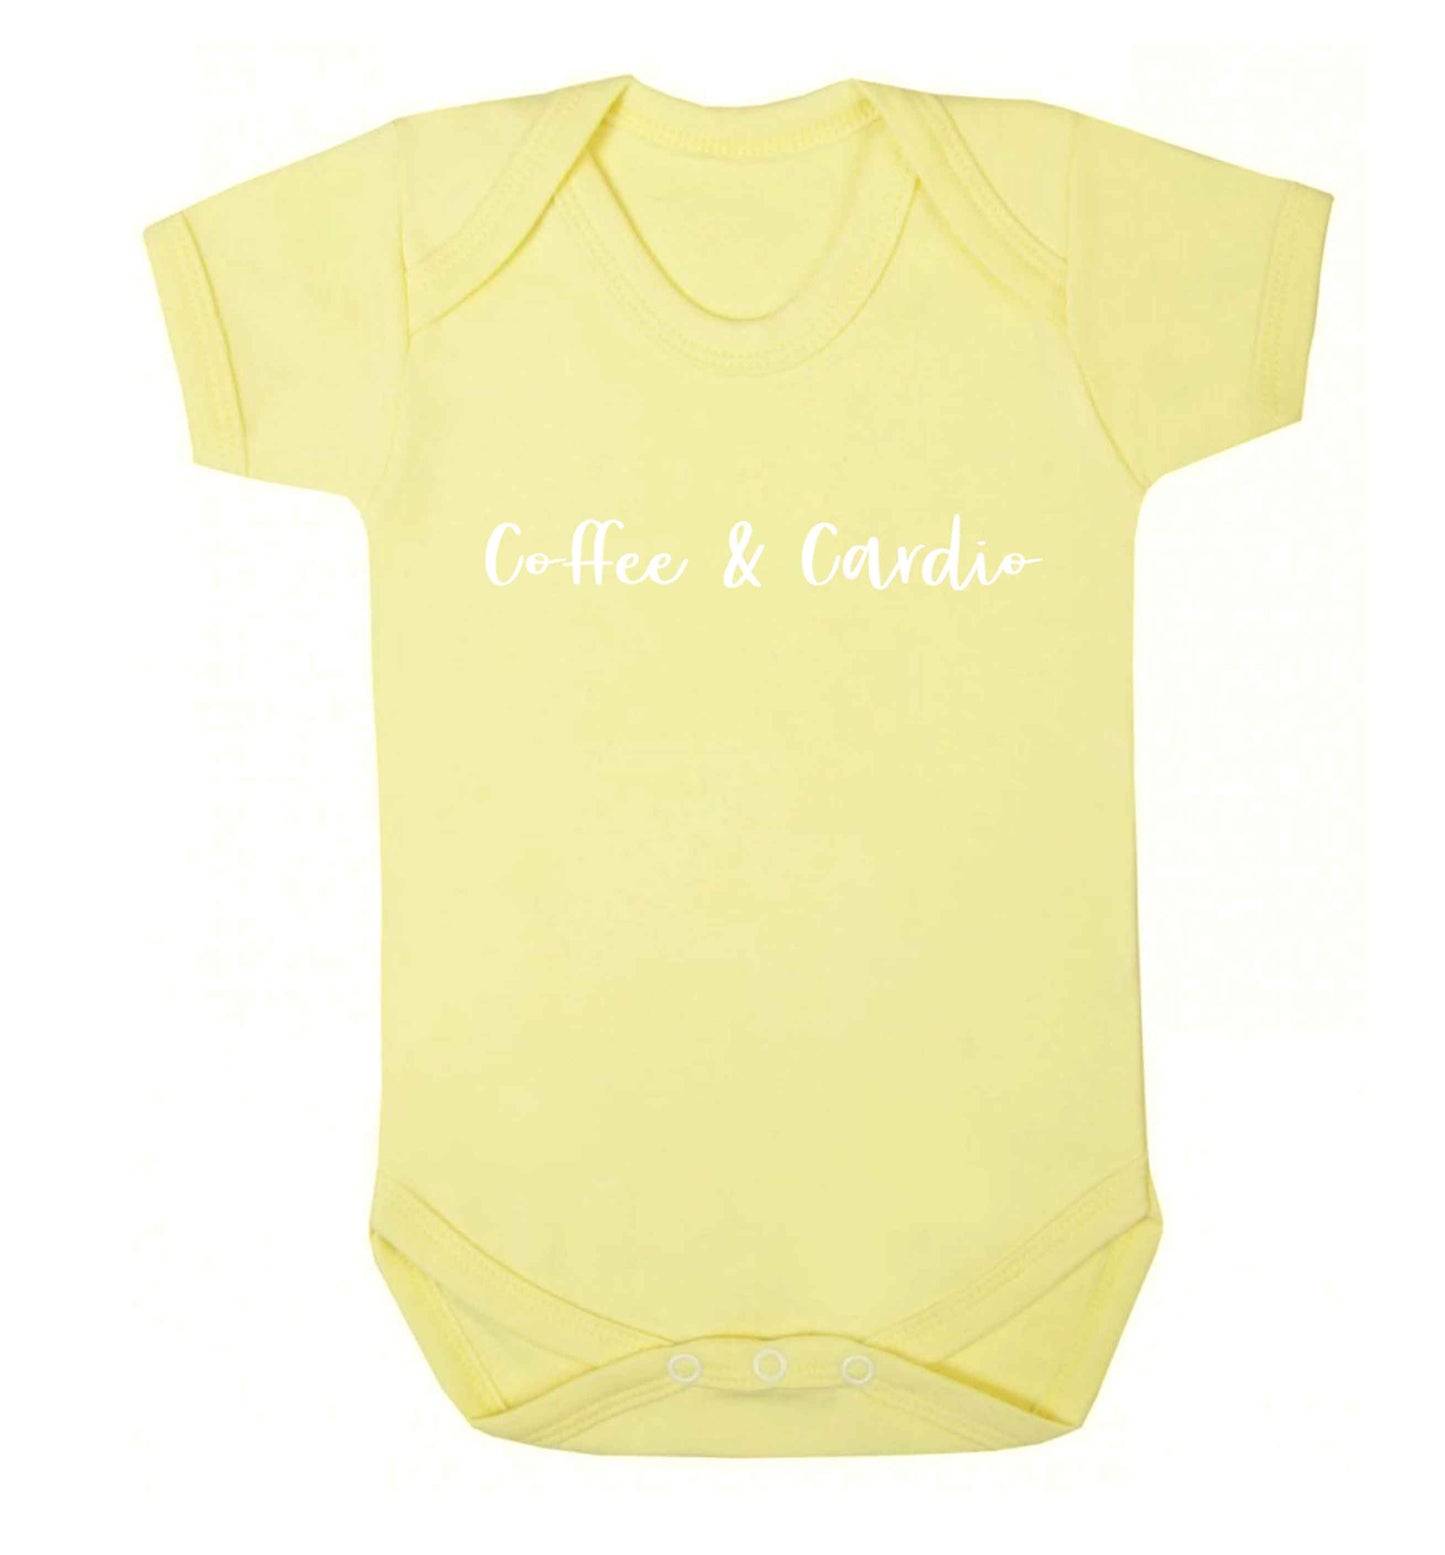 Coffee and cardio Baby Vest pale yellow 18-24 months